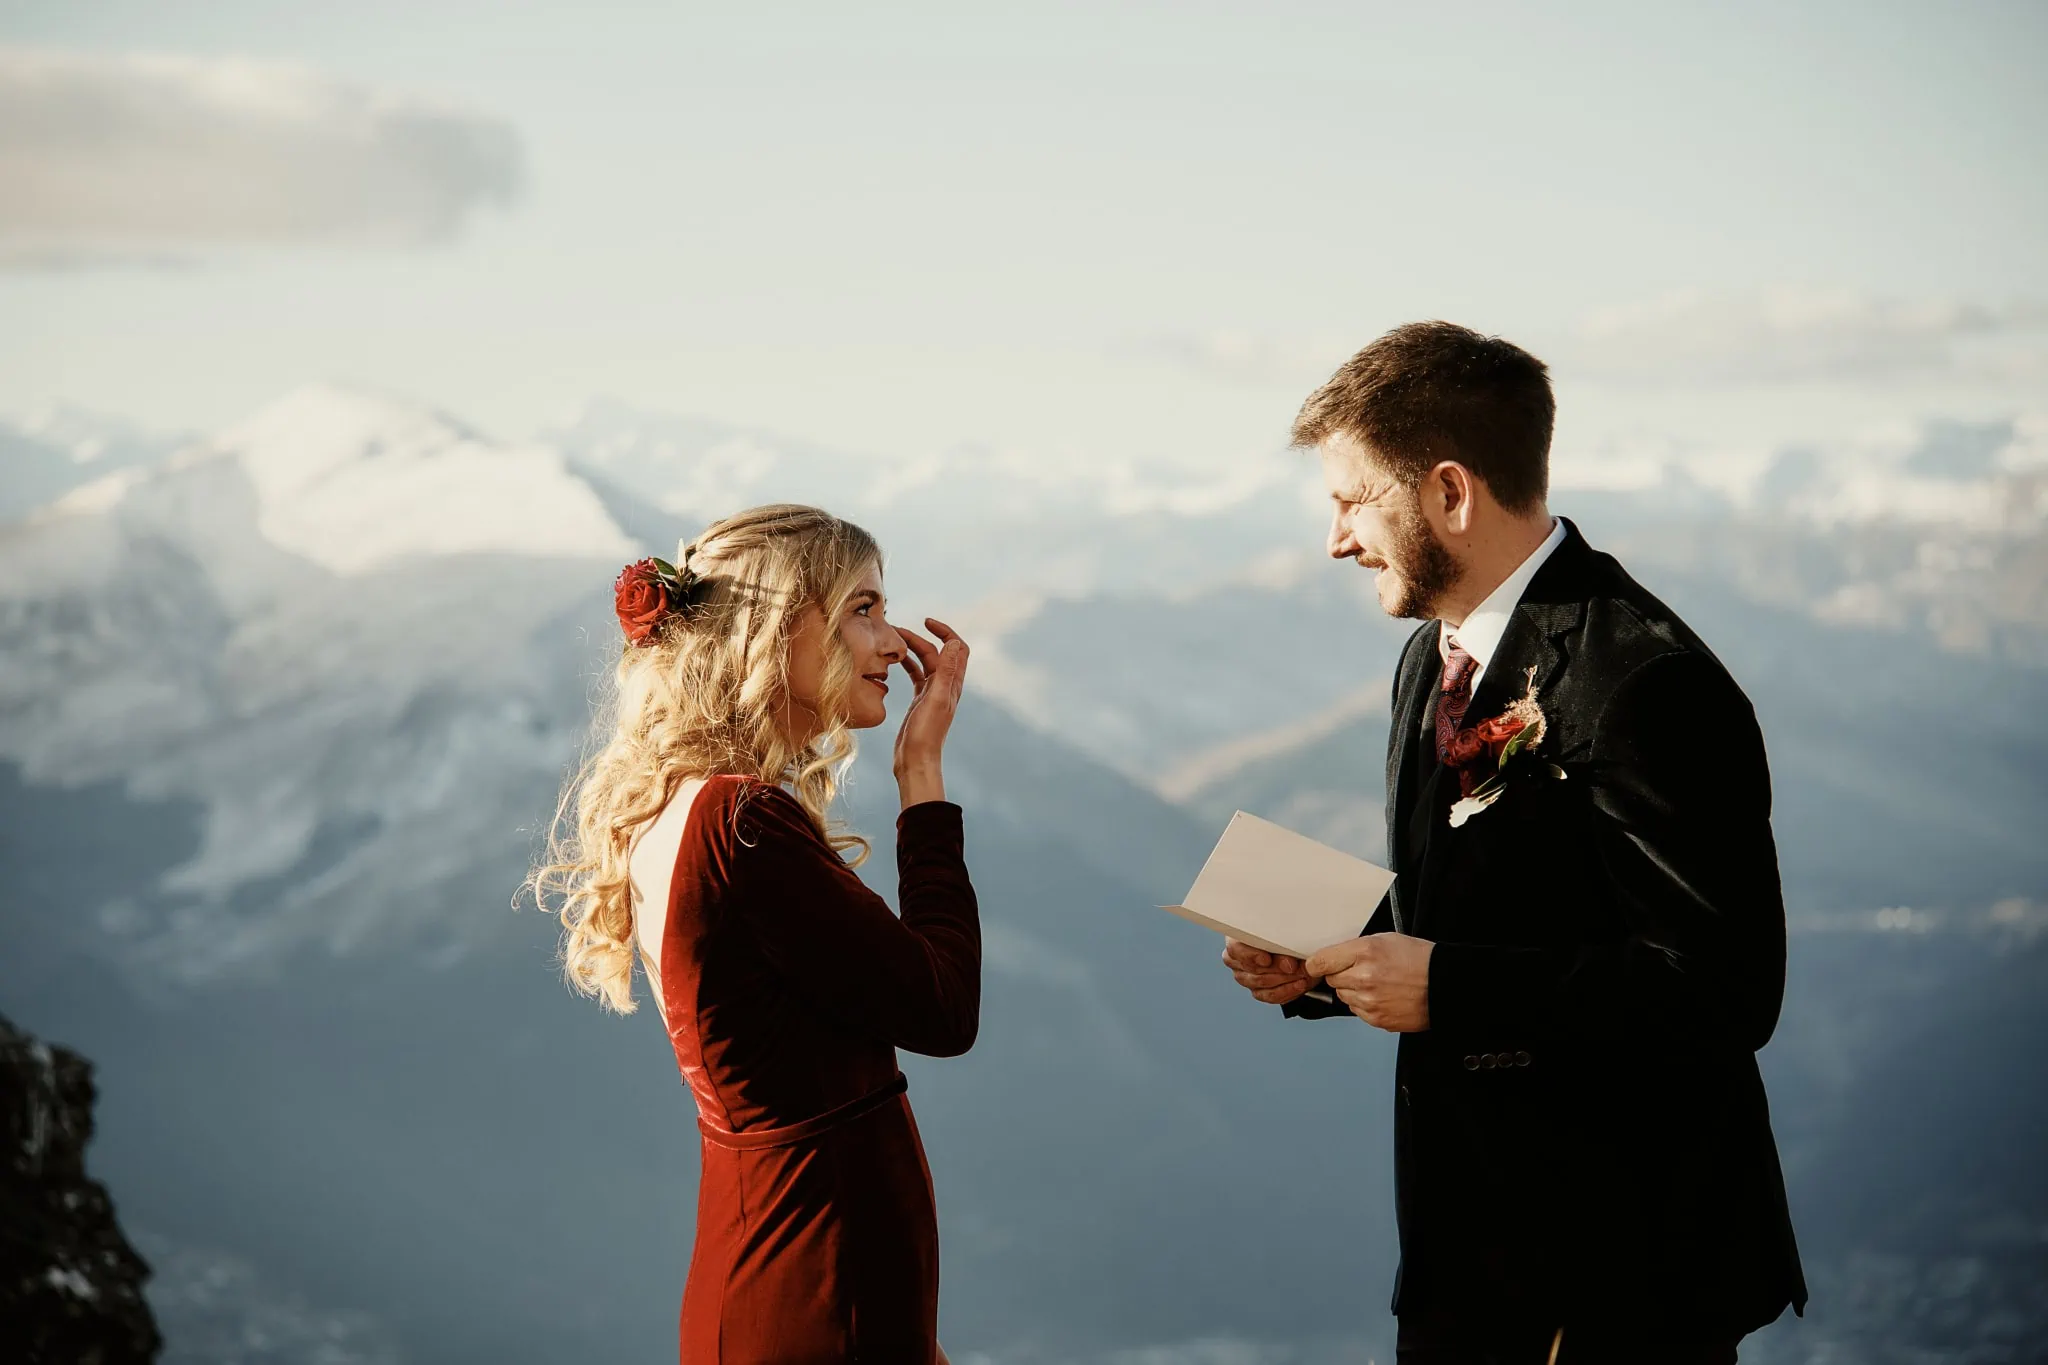 Claire and Rob's mountainous heli elopement wedding at Cecil Peak.